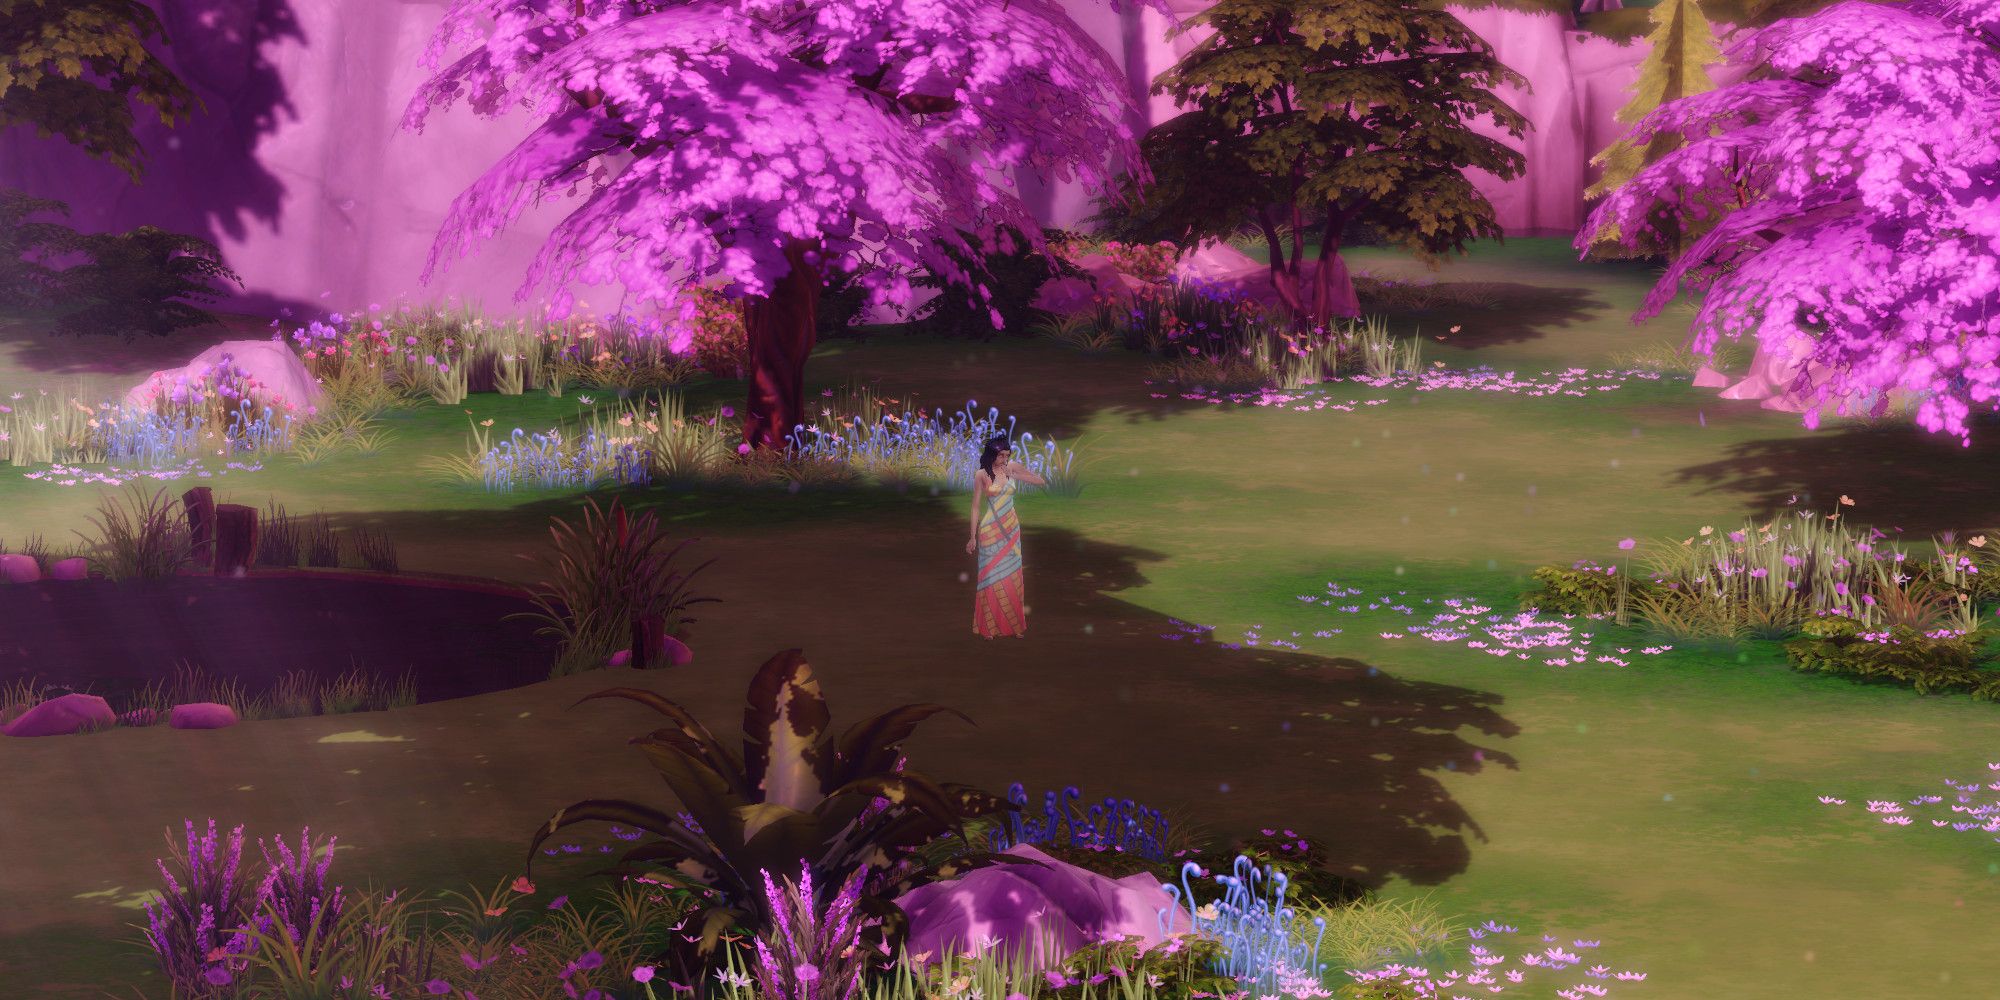 Sims from The Sims 4 stands in the middle of Sylvan Glade